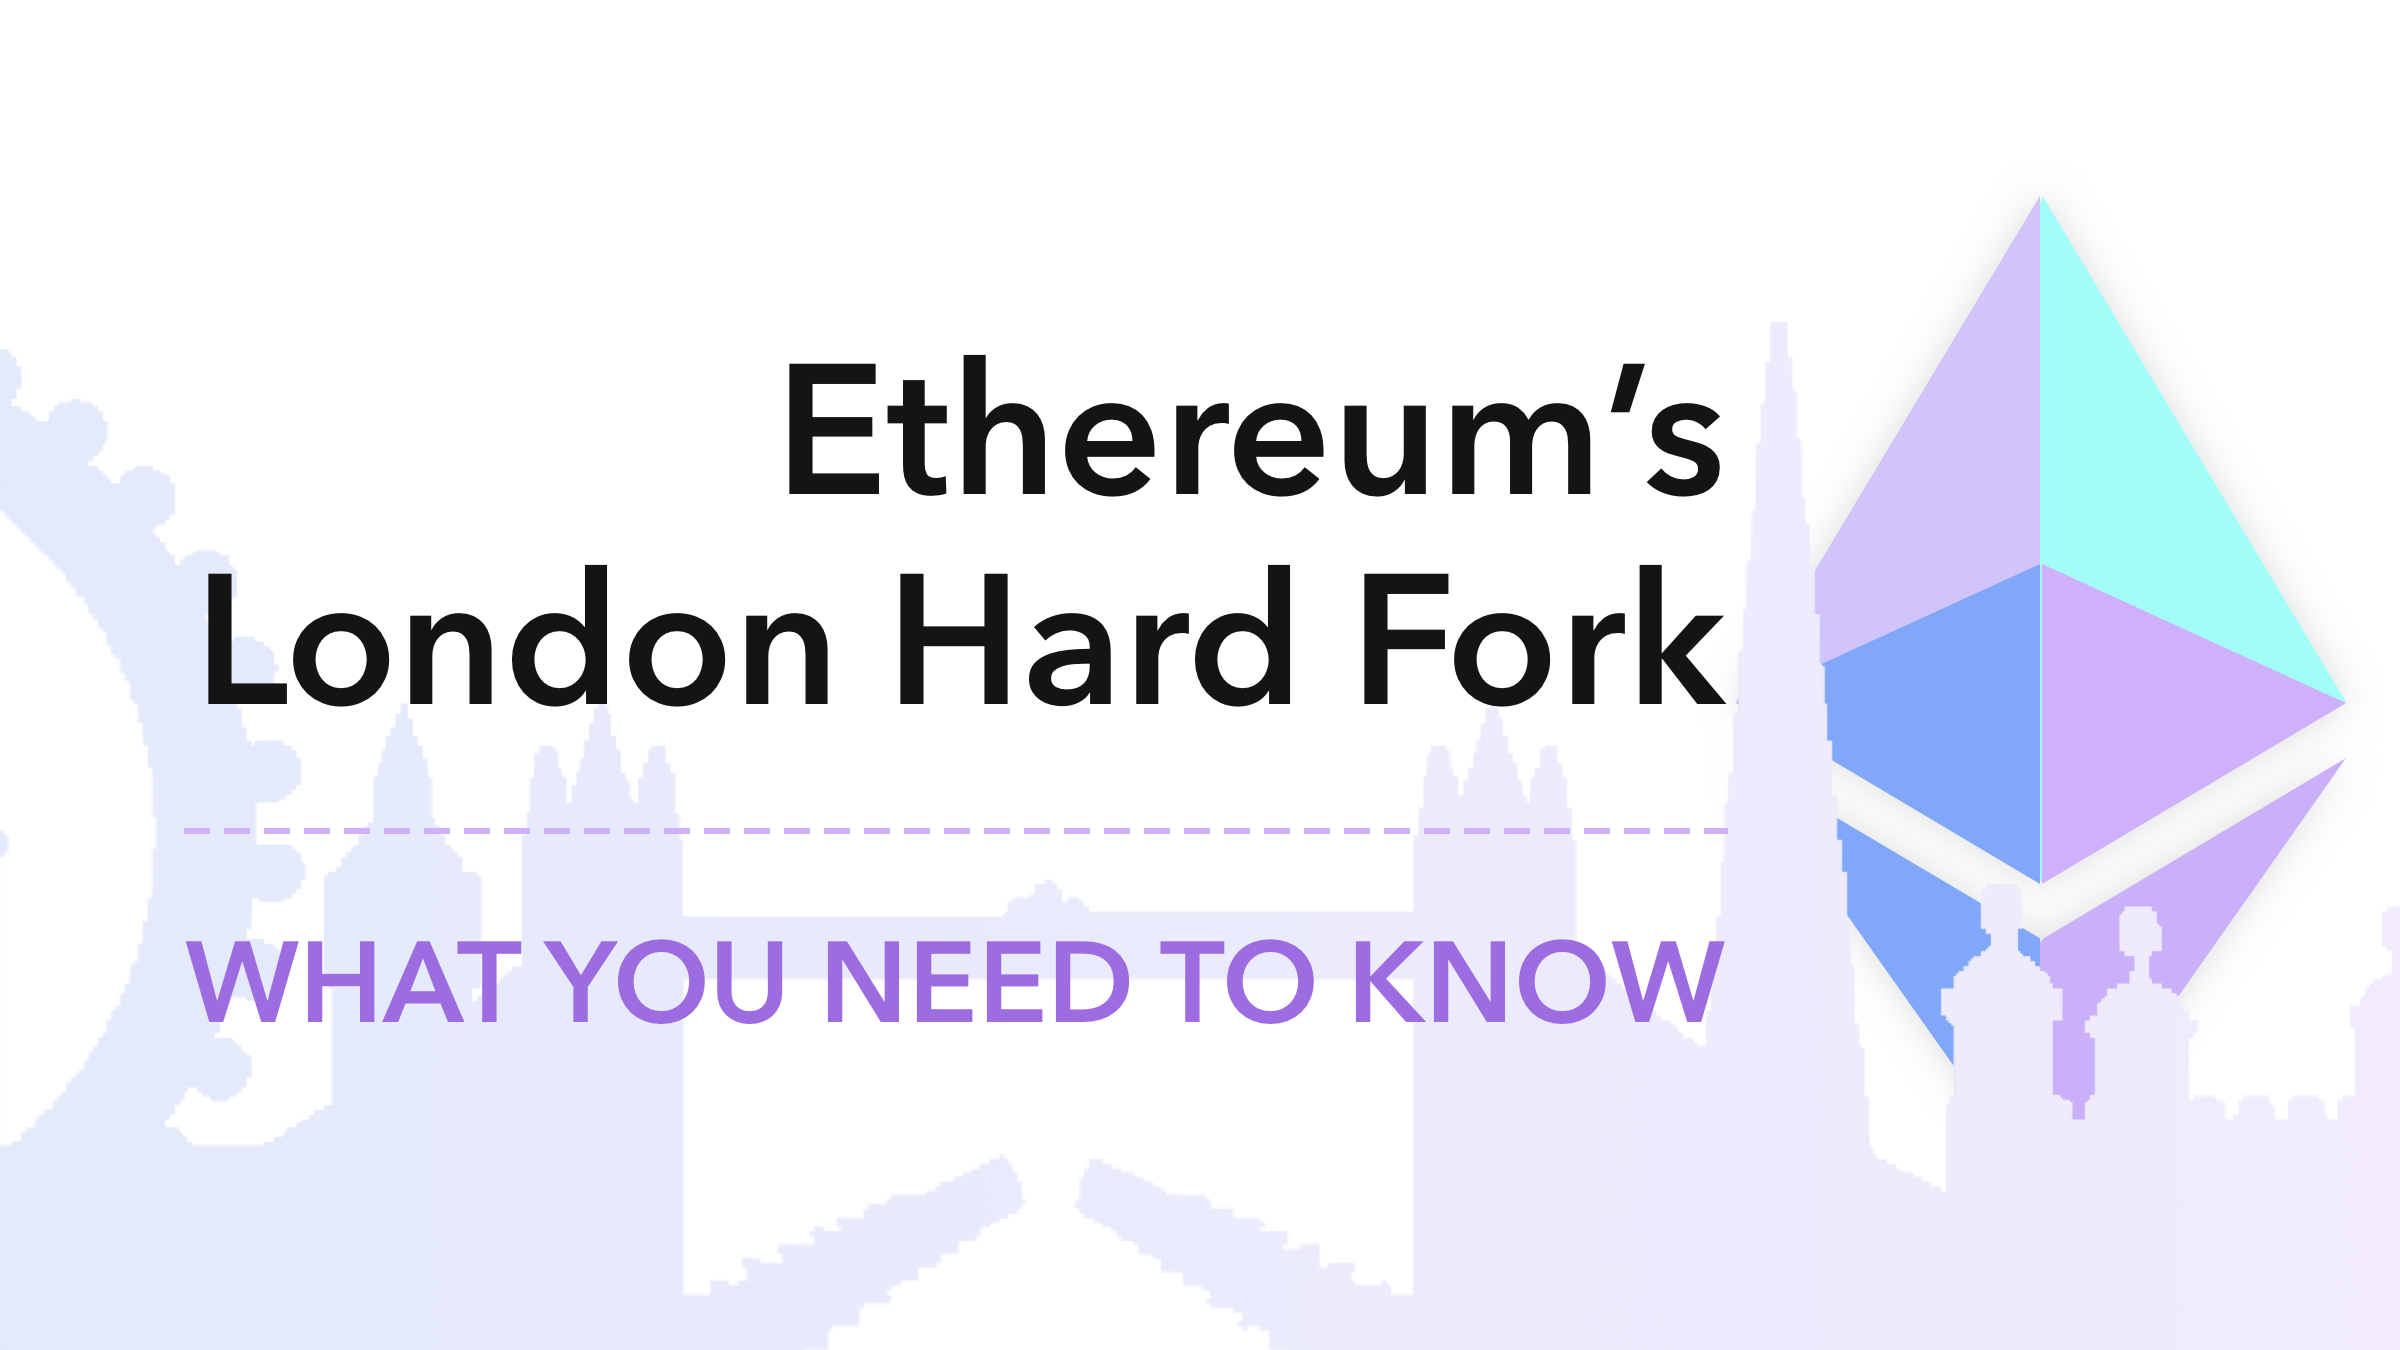 Ethereum’s London Hardfork is Live: What You Need to Know